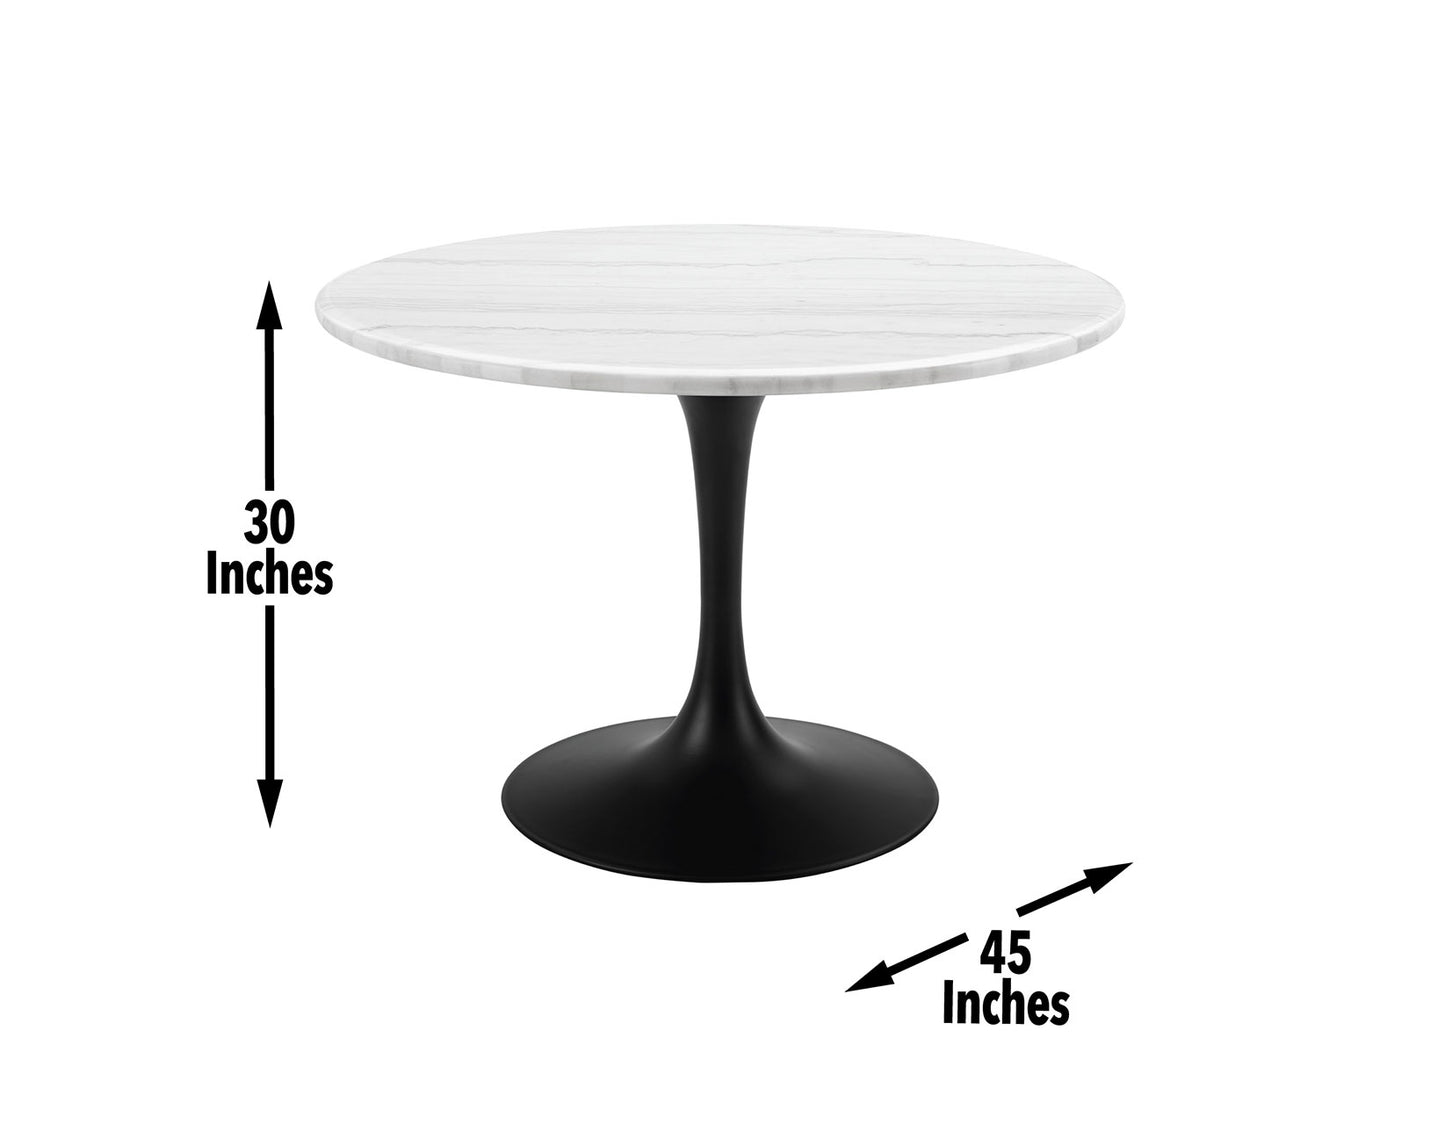 Colfax 45 inch Round White Marble Top/Black Base Dining Table